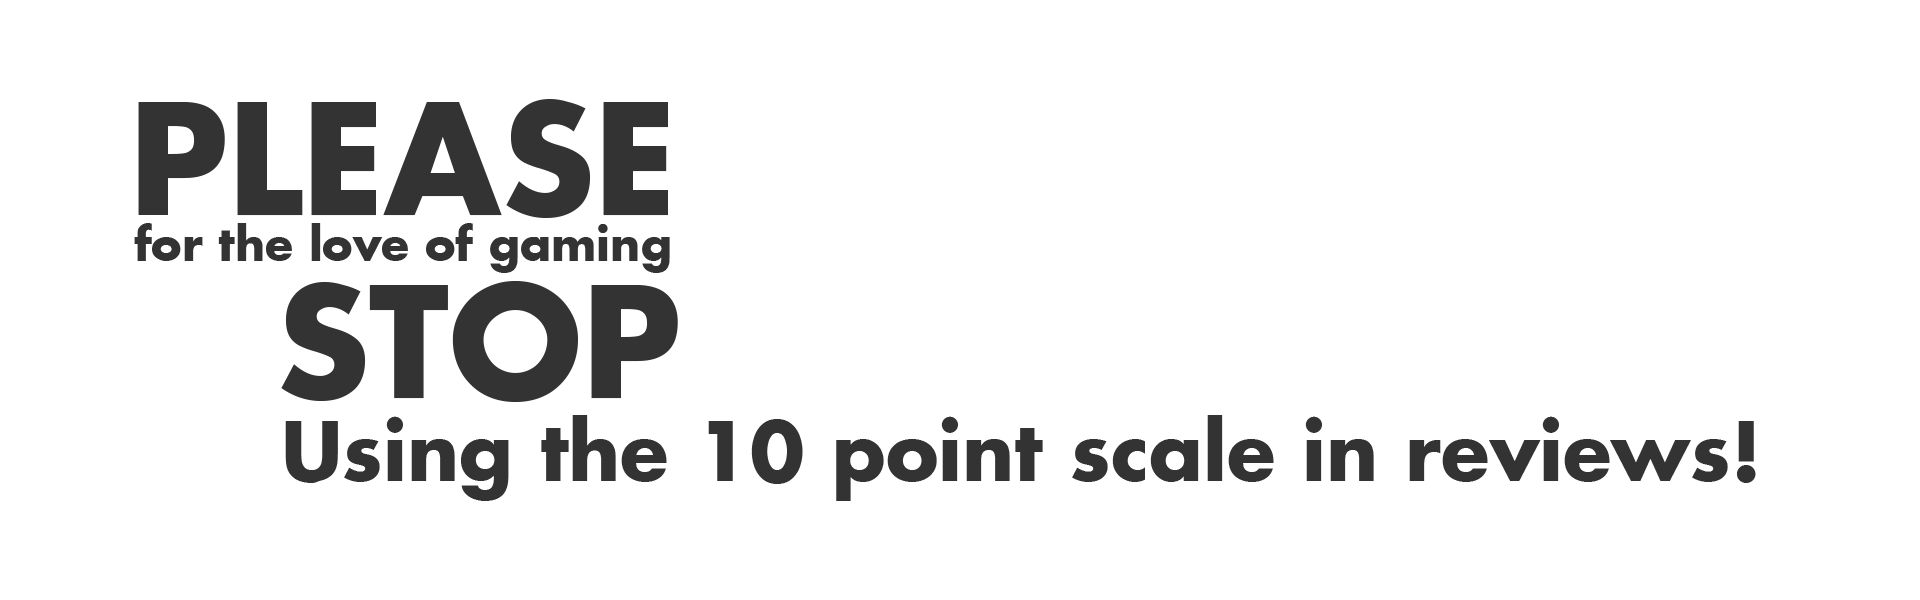 Video Game Reviews: A Discussion Of The Ten-Point Scale And Inflated Scores